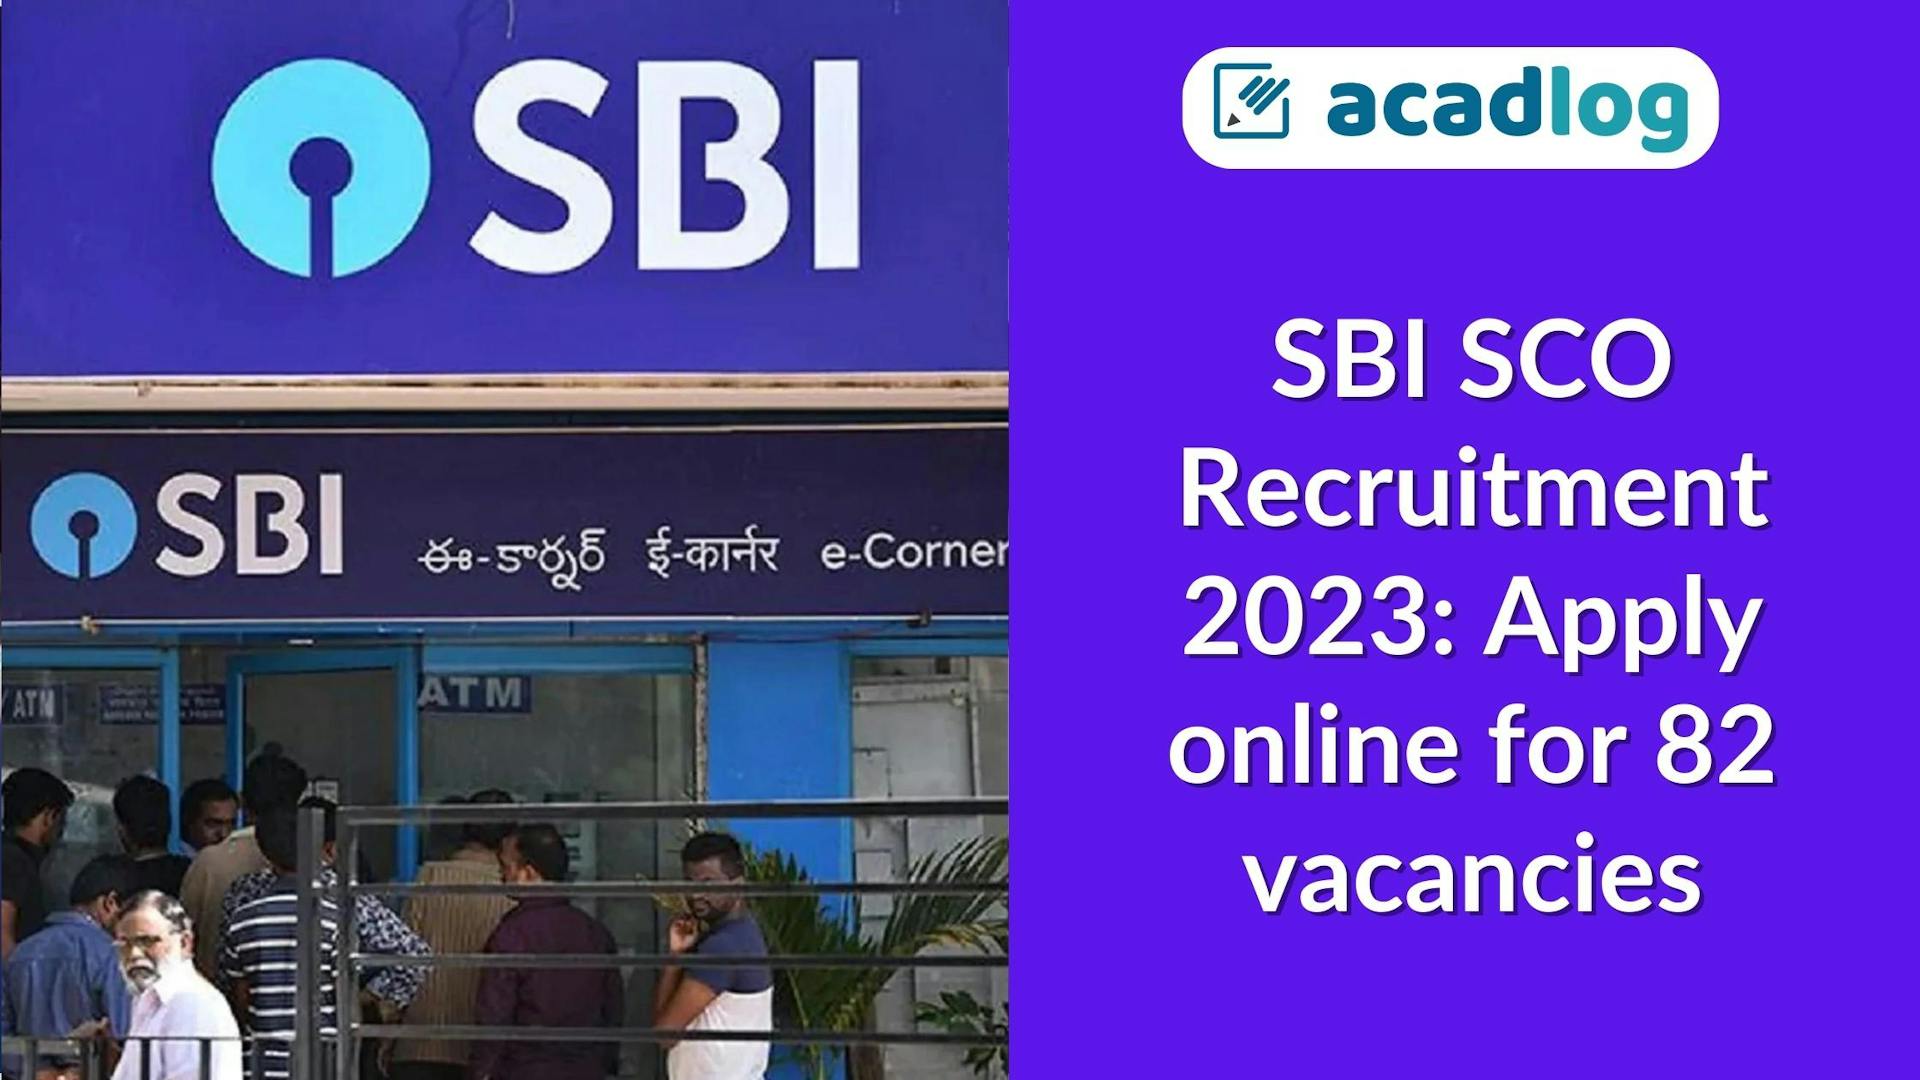 SBI Work From Home Jobs 2023: Apply for Pharmacist & Other Posts